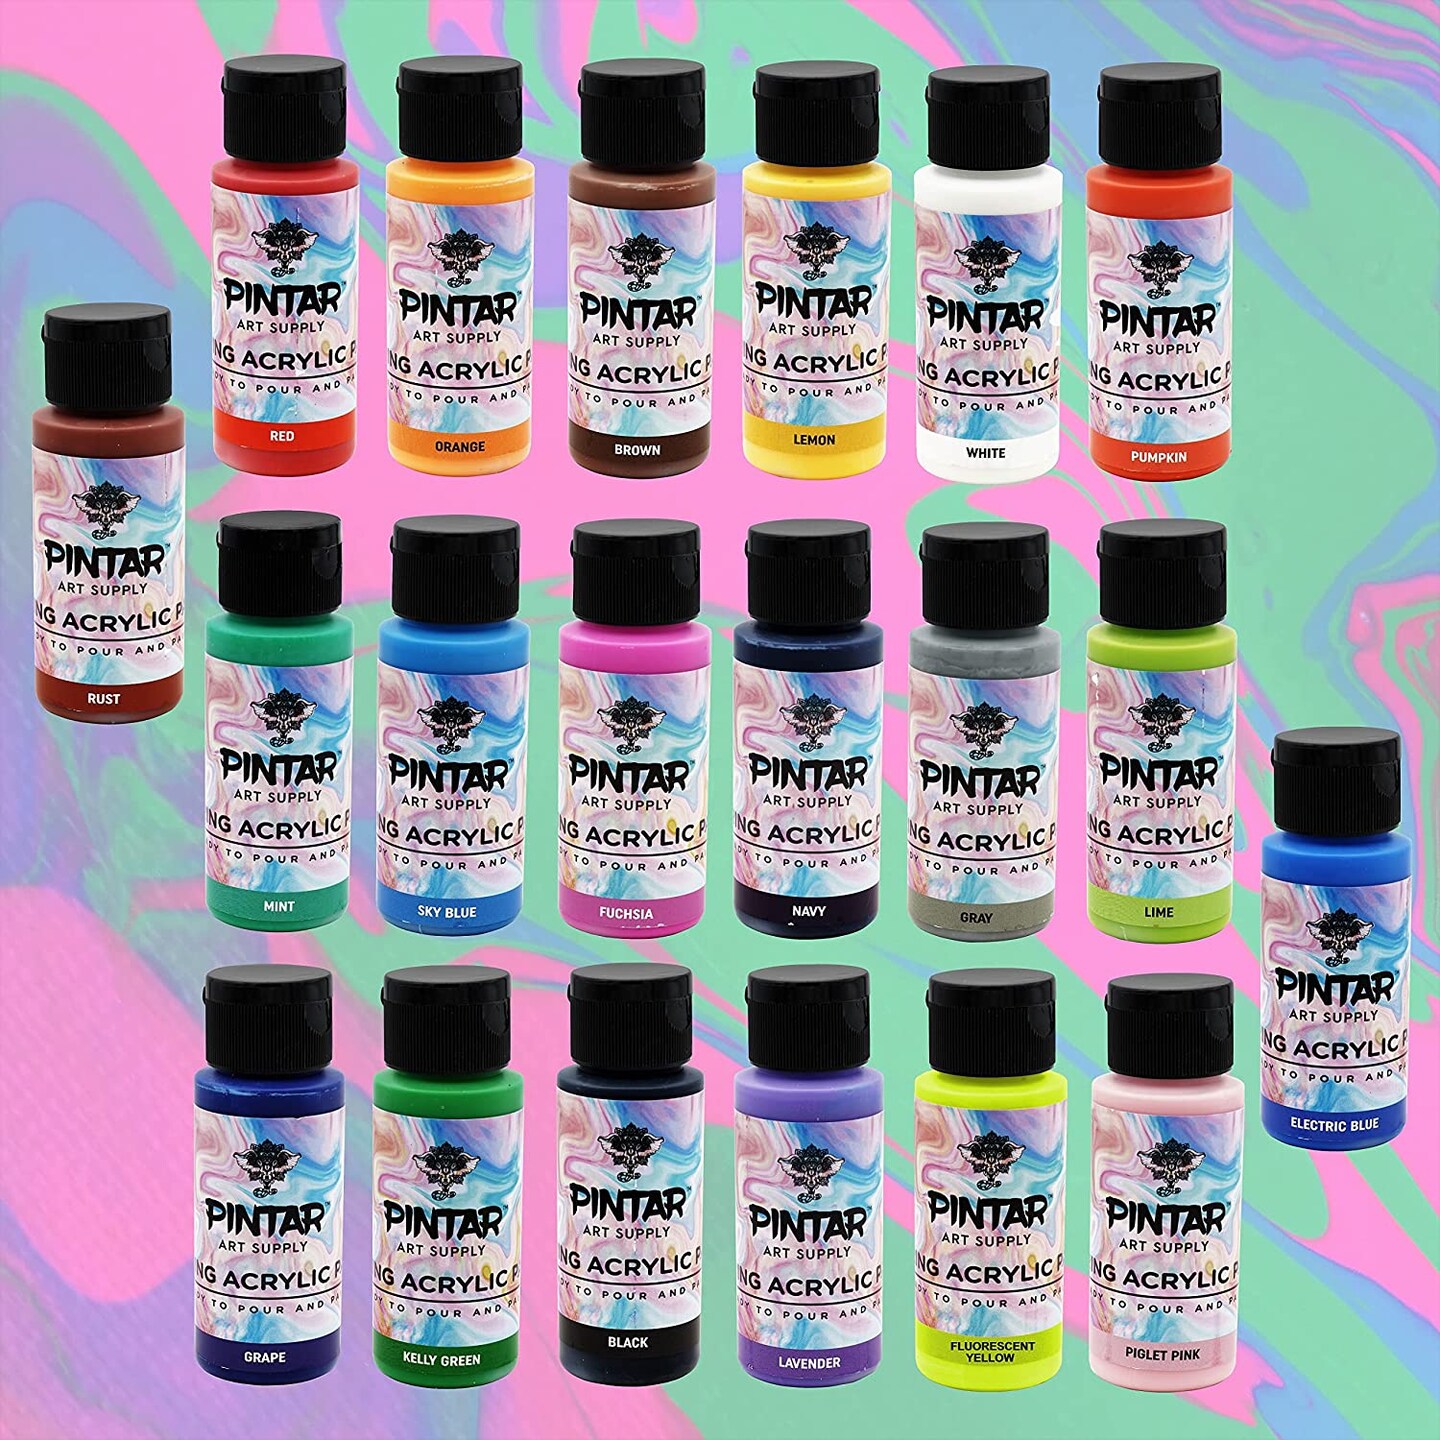 Pintar Art Supply Acrylic Pouring Paints, Set of 20 Colors | High Flow, Easy Pour Acrylic Paint| Pre-mixed, Water-Based Craft Paint, 2oz Bottle Assortment of 20 Colors